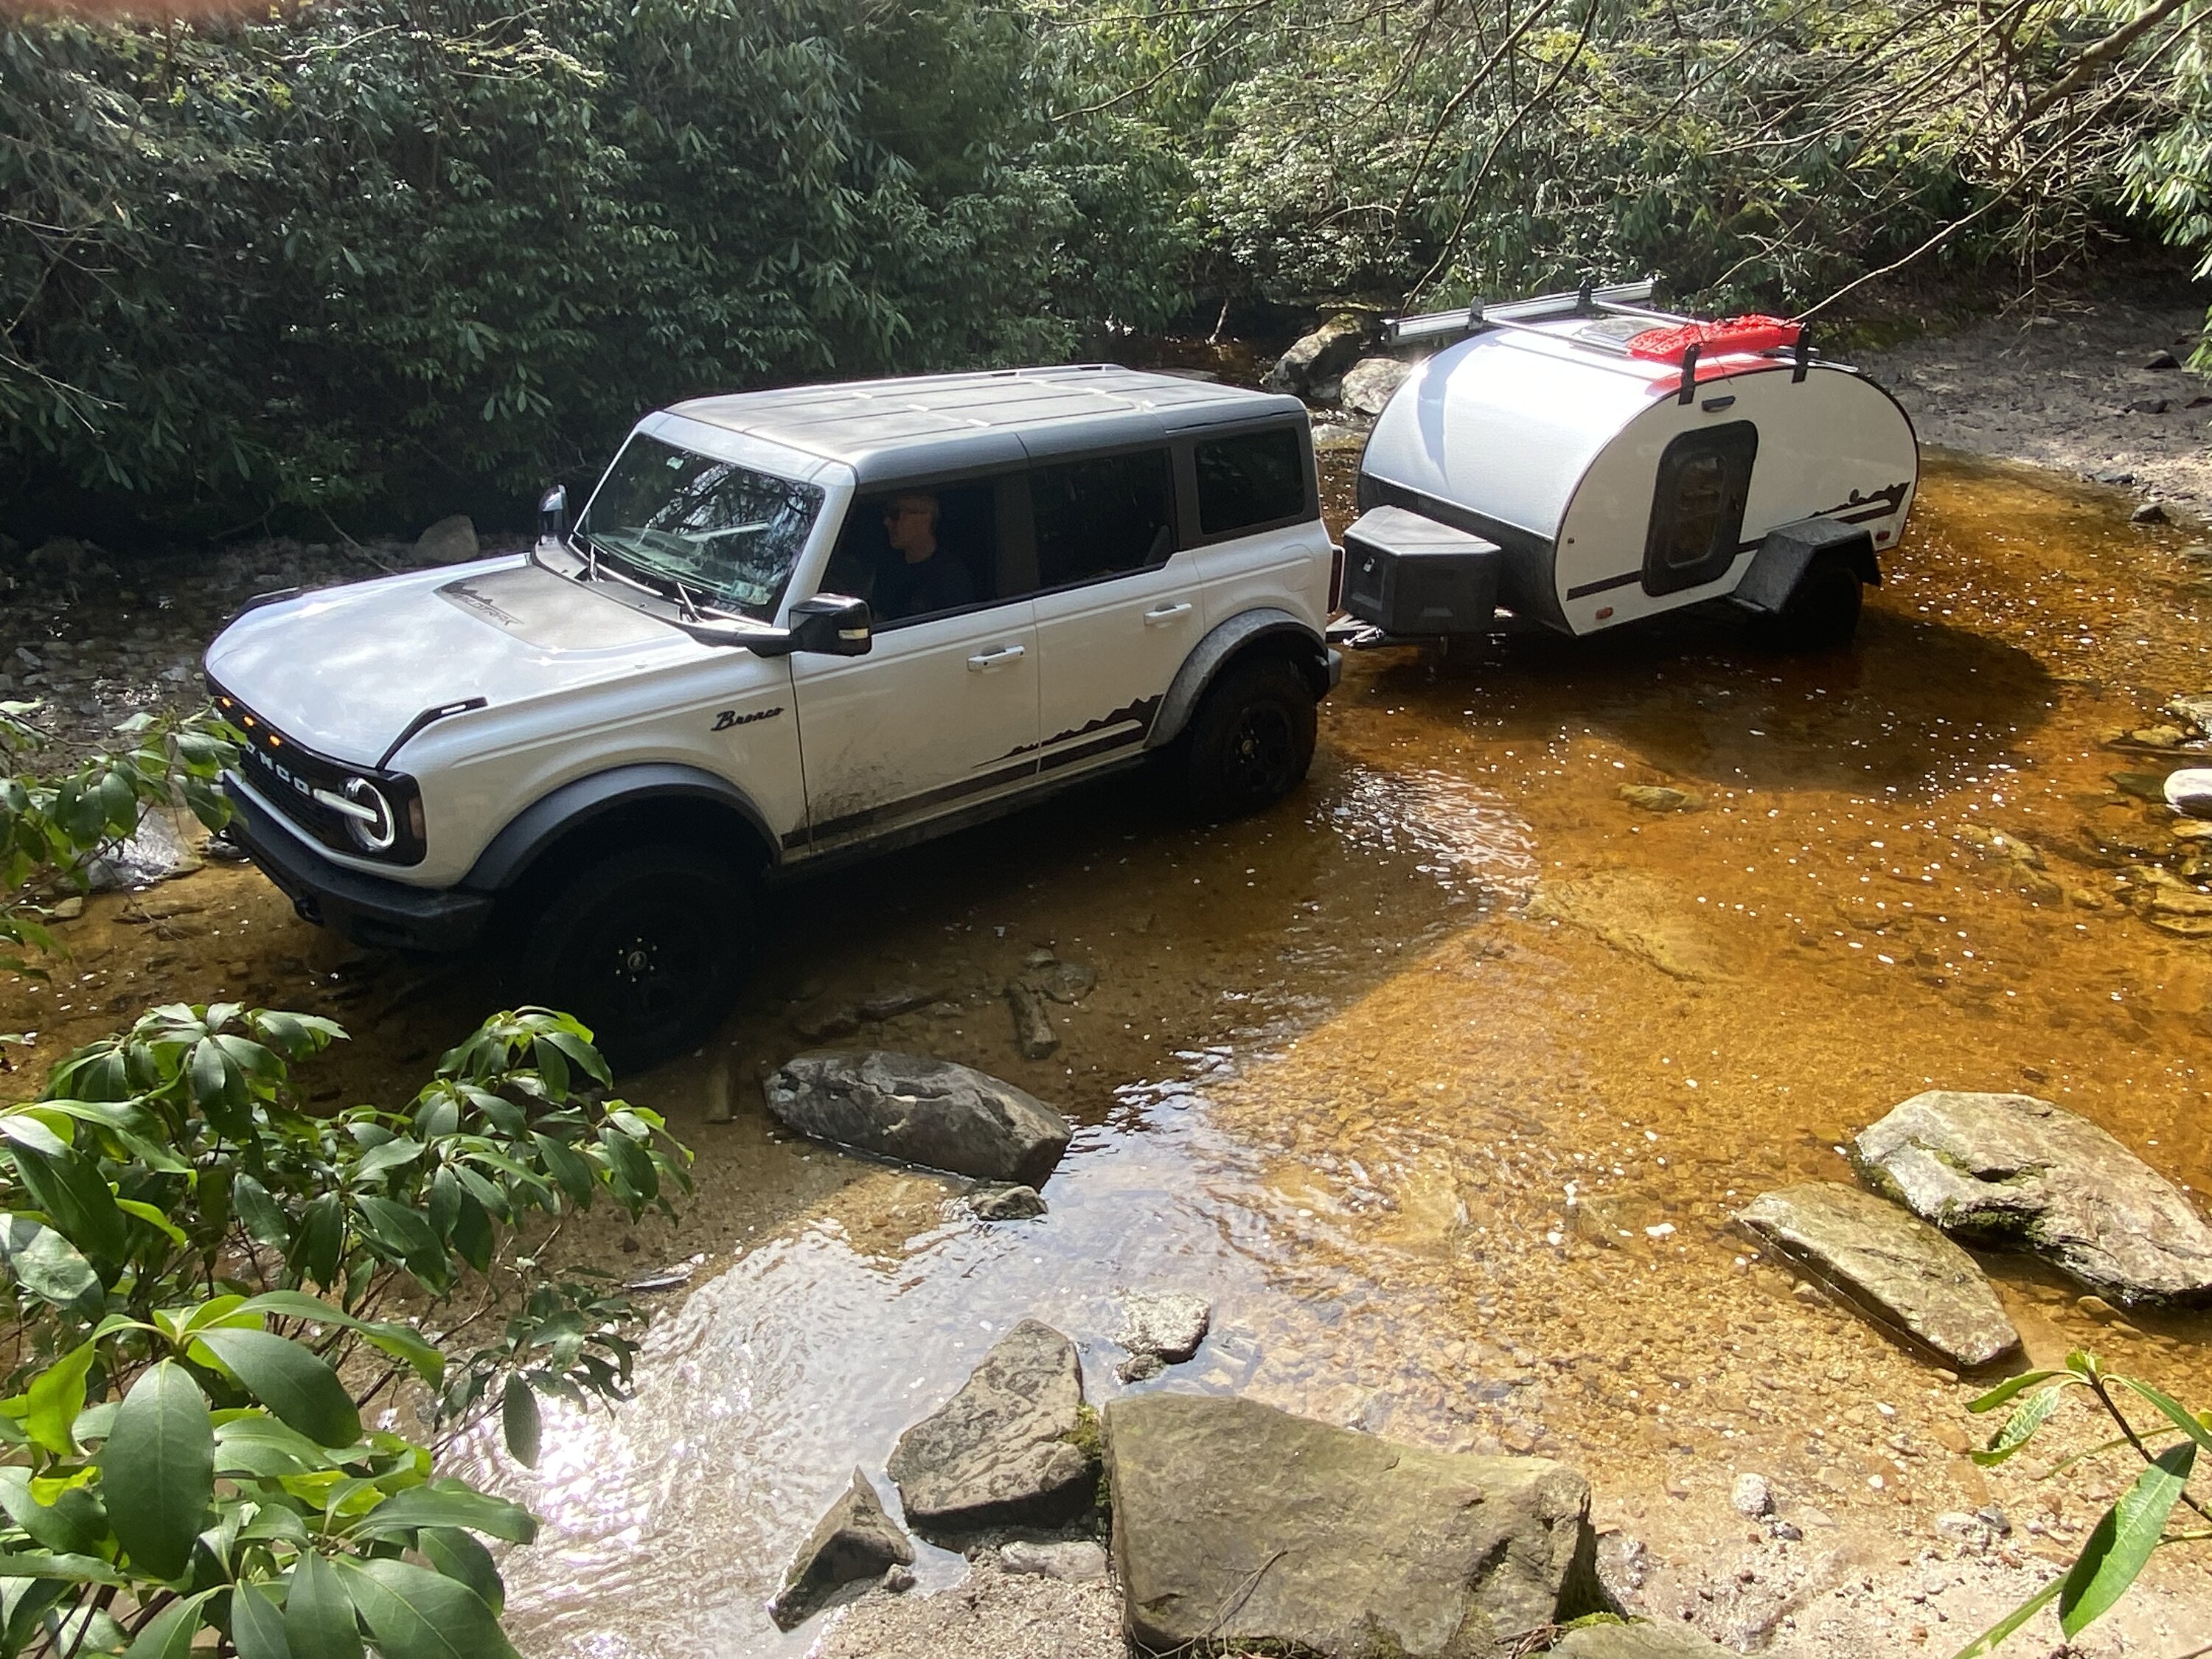 Ford Bronco Bronco-Inspired Custom Home-Built Teardrop Trailer and Her Maiden Voyage BF13932C-8D06-4F81-A46F-7F3226815F4F